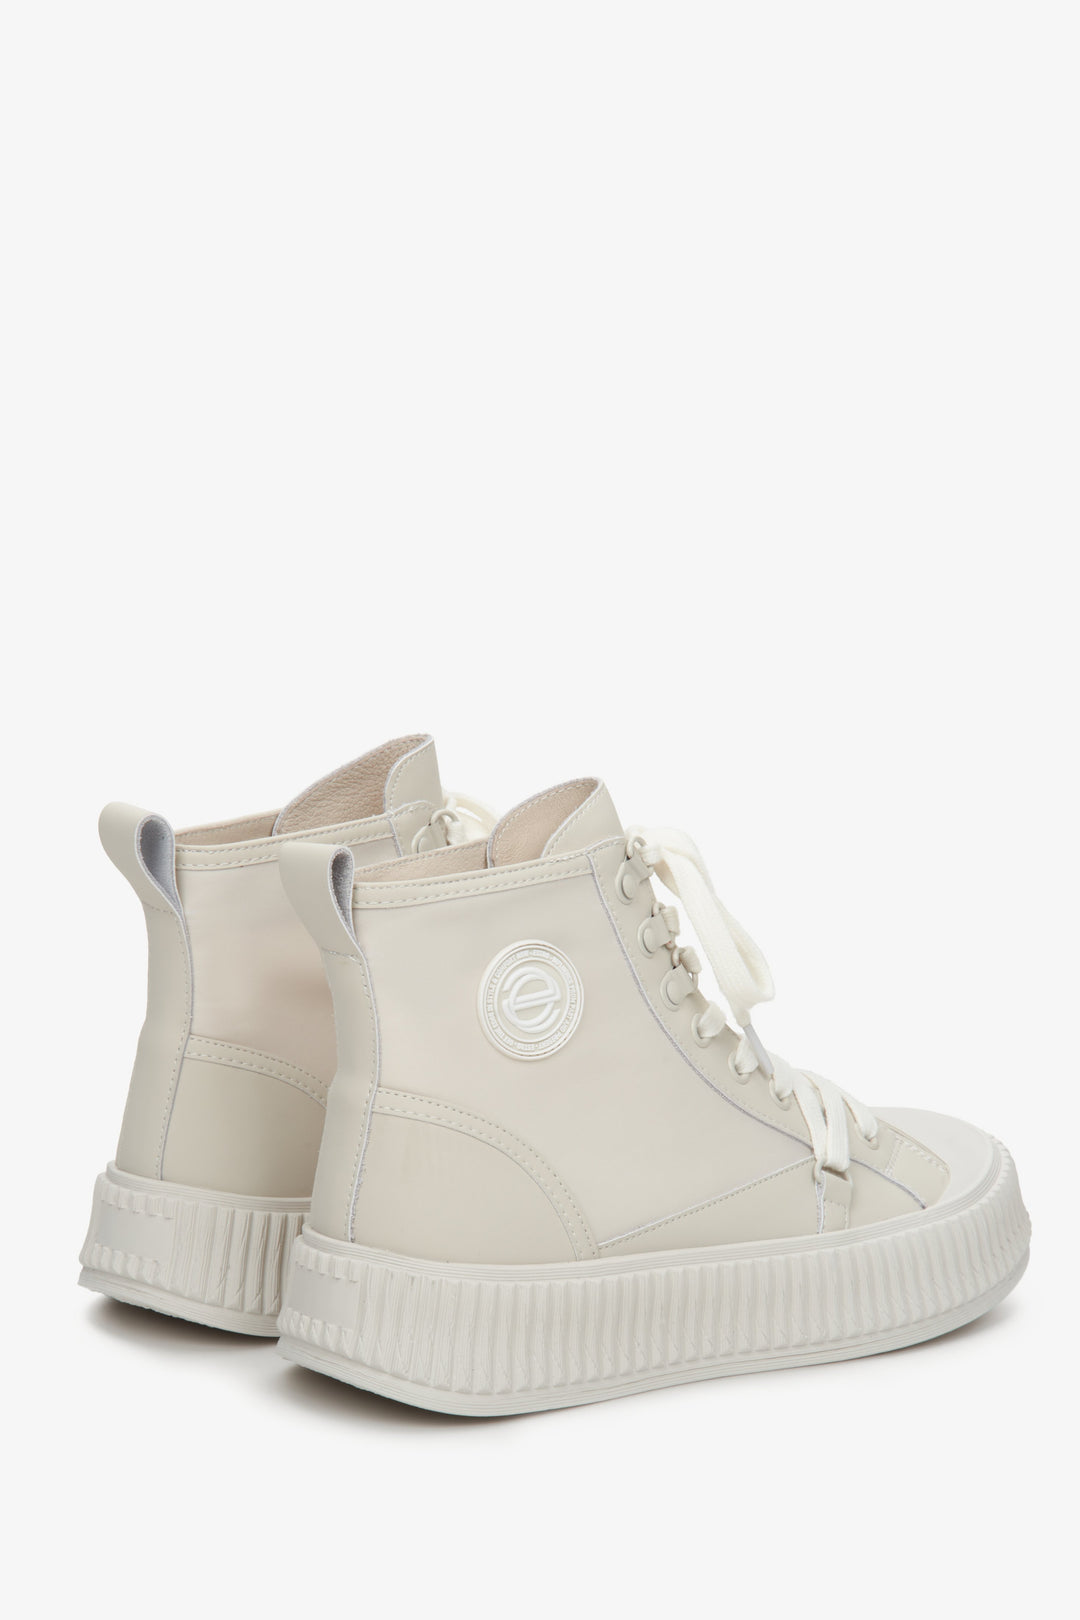 Women's white sneakers with the visible Estro brand logo.